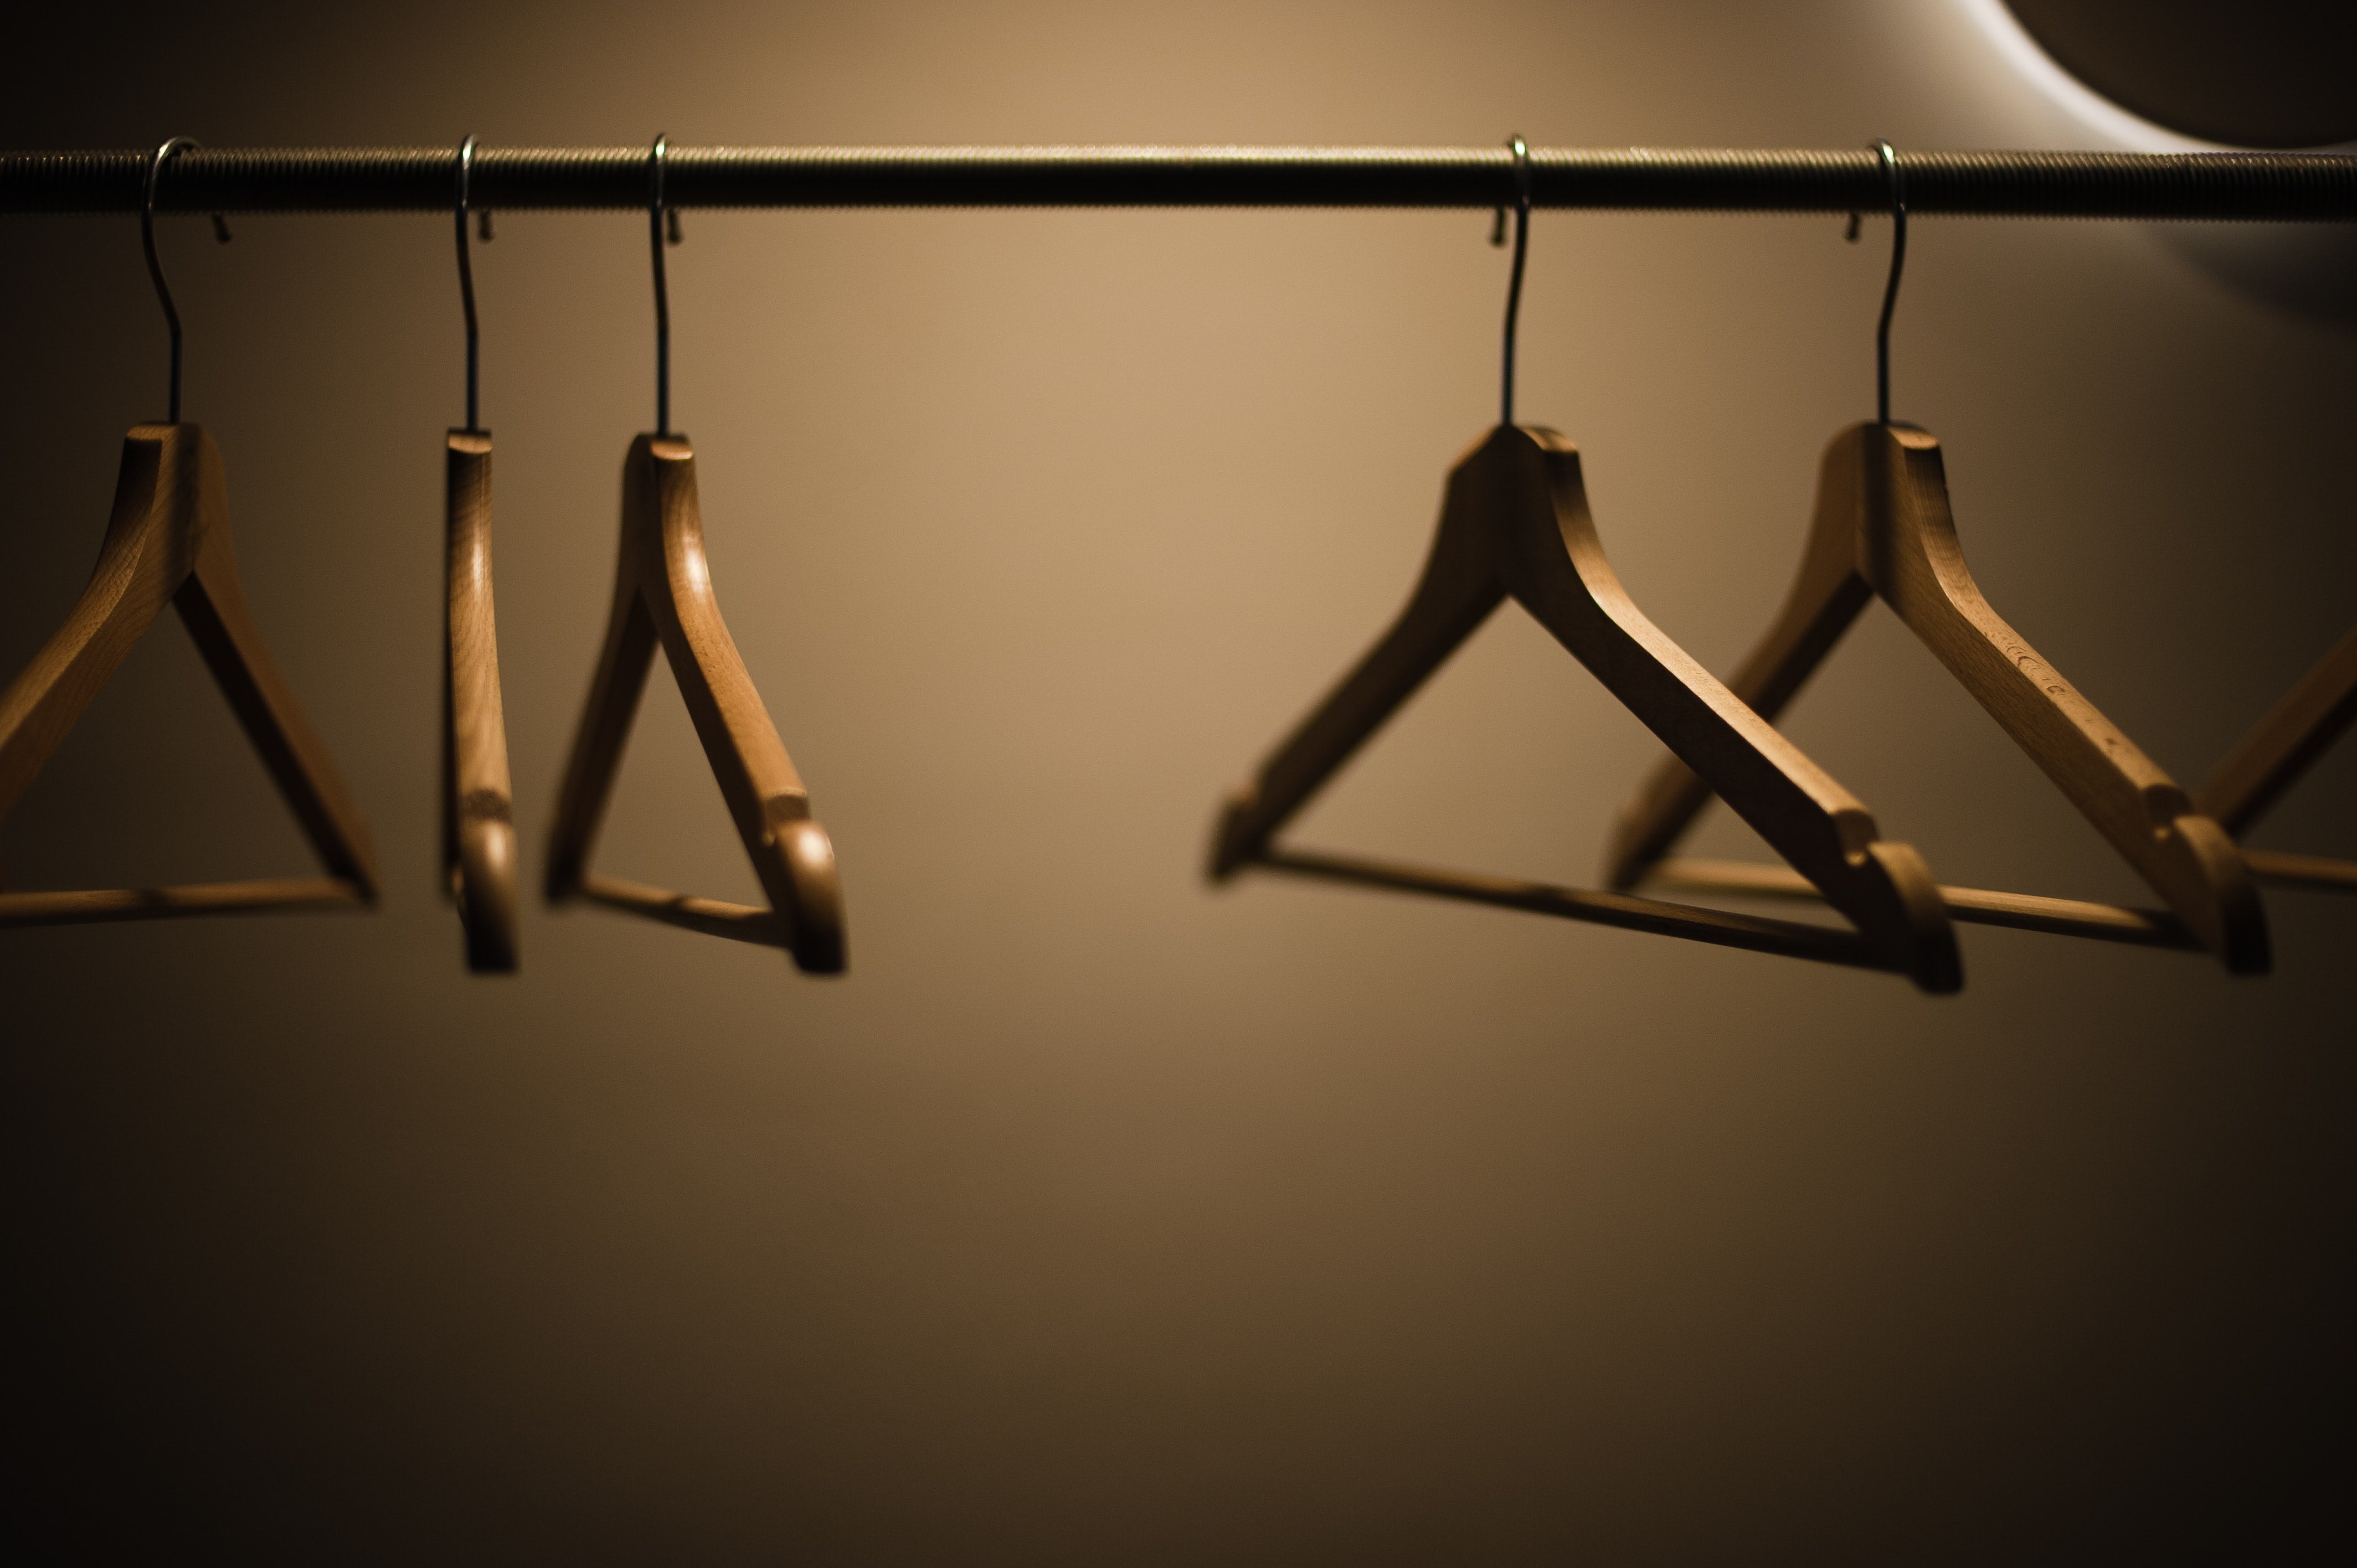 Wooden clothing hangers on a rod